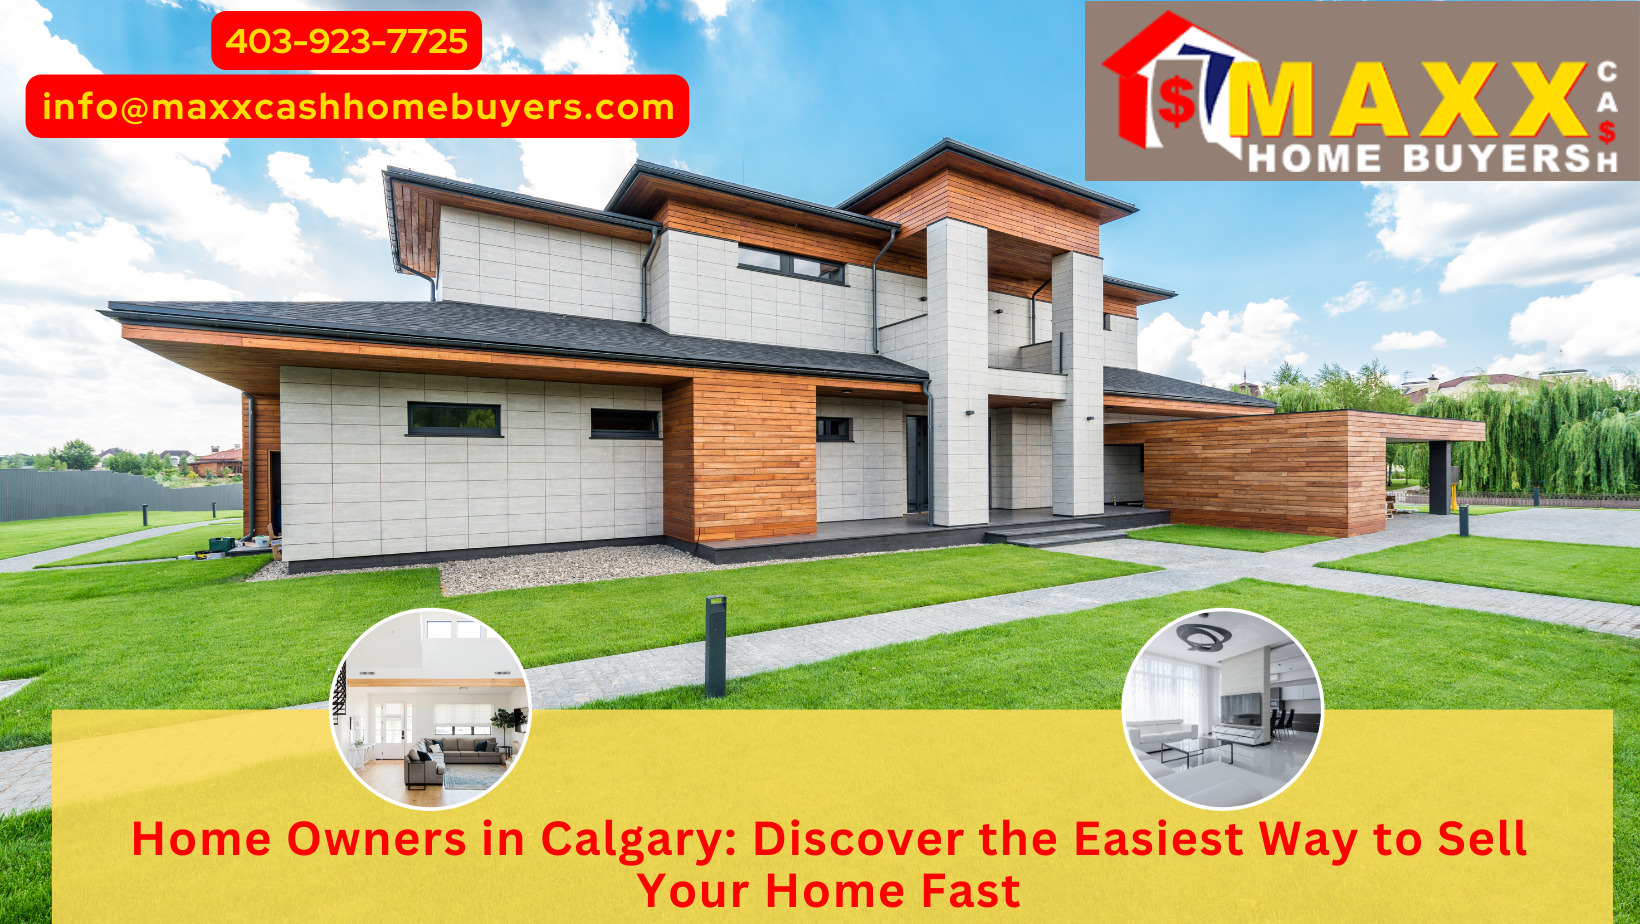 Home Owners in Calgary Discover the Easiest Way to Sell Your Home Fast